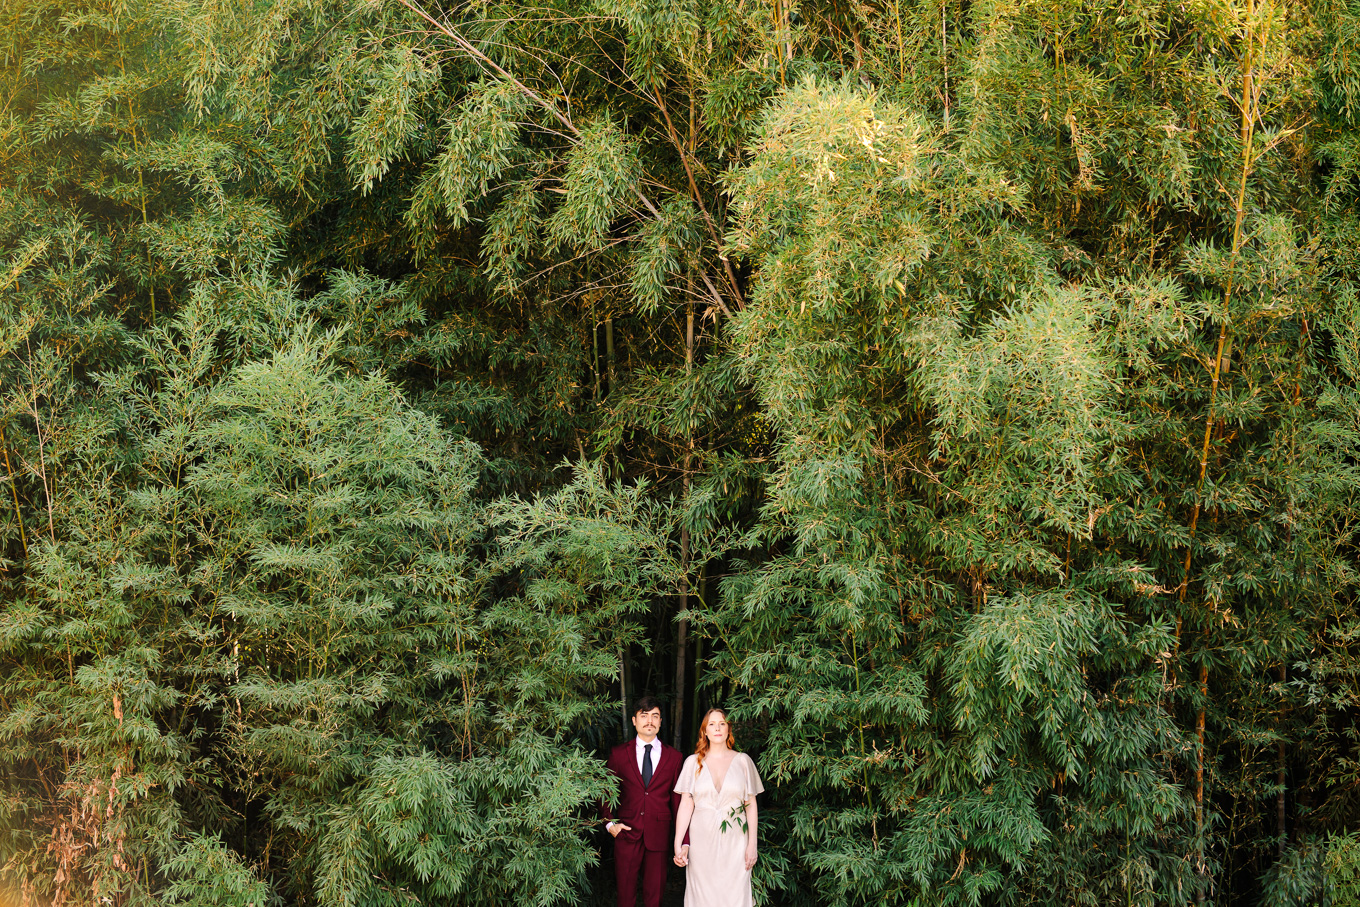 Bamboo forest at LA Arboretum | Best Southern California Garden Wedding Venues | Colorful and elevated wedding photography for fun-loving couples | #gardenvenue #weddingvenue #socalweddingvenue #bouquetideas #uniquebouquet   Source: Mary Costa Photography | Los Angeles 